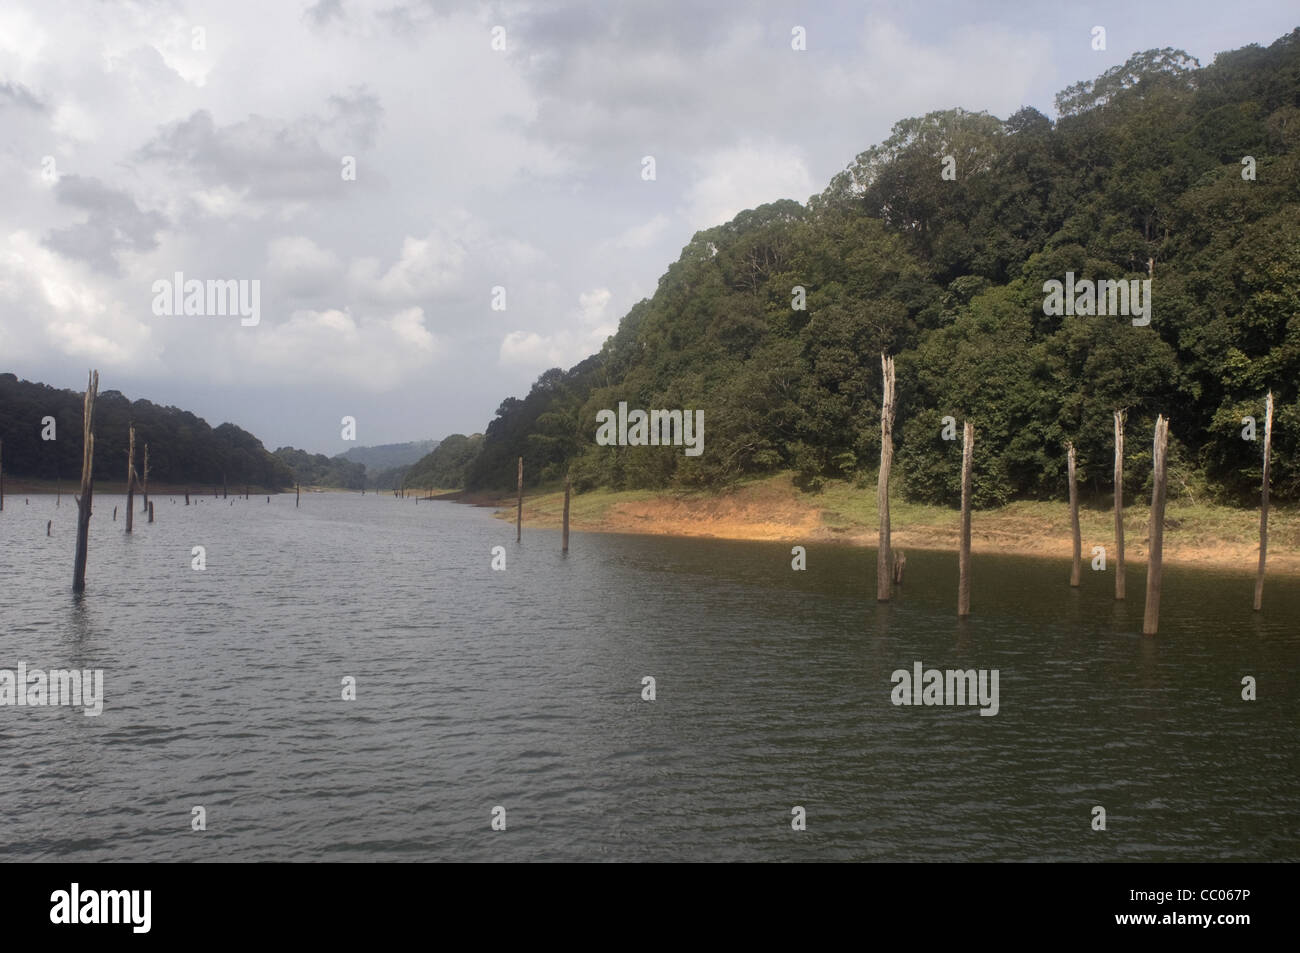 Back waters of the periyar dam. A famous tourist place near the periyar tiger reserve of Kerala Stock Photo